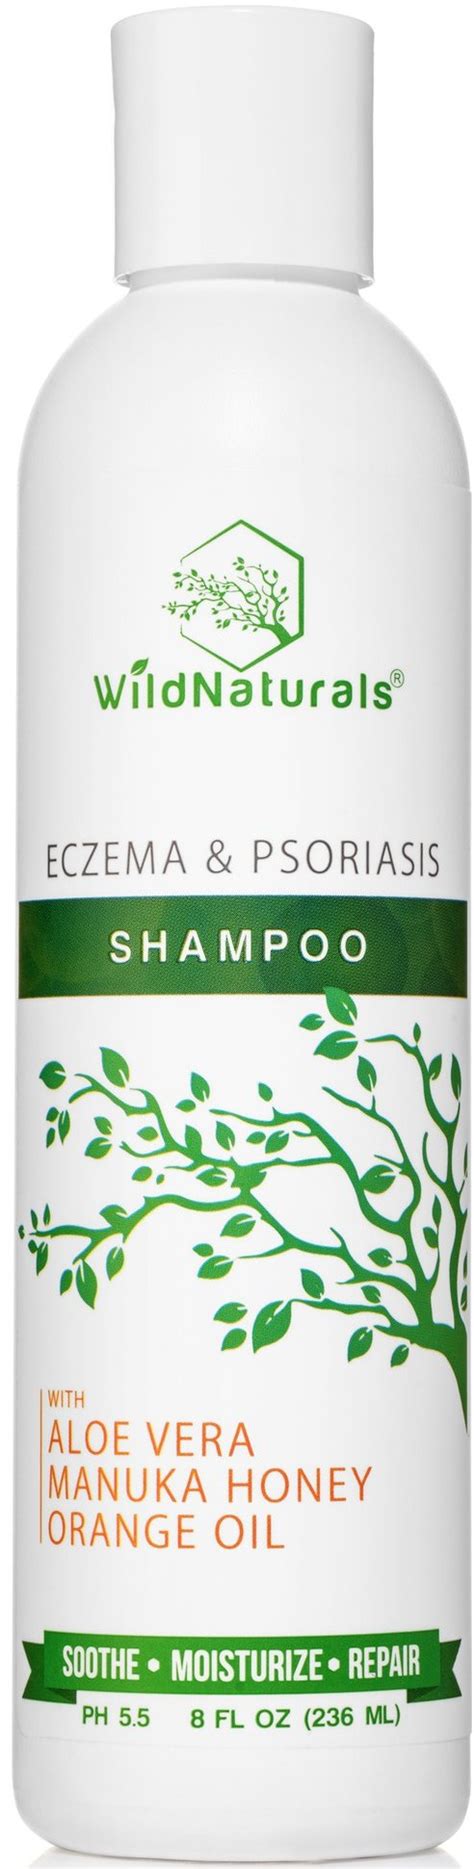 Wild Naturals Eczema And Psoriasis Shampoo Ingredients Explained